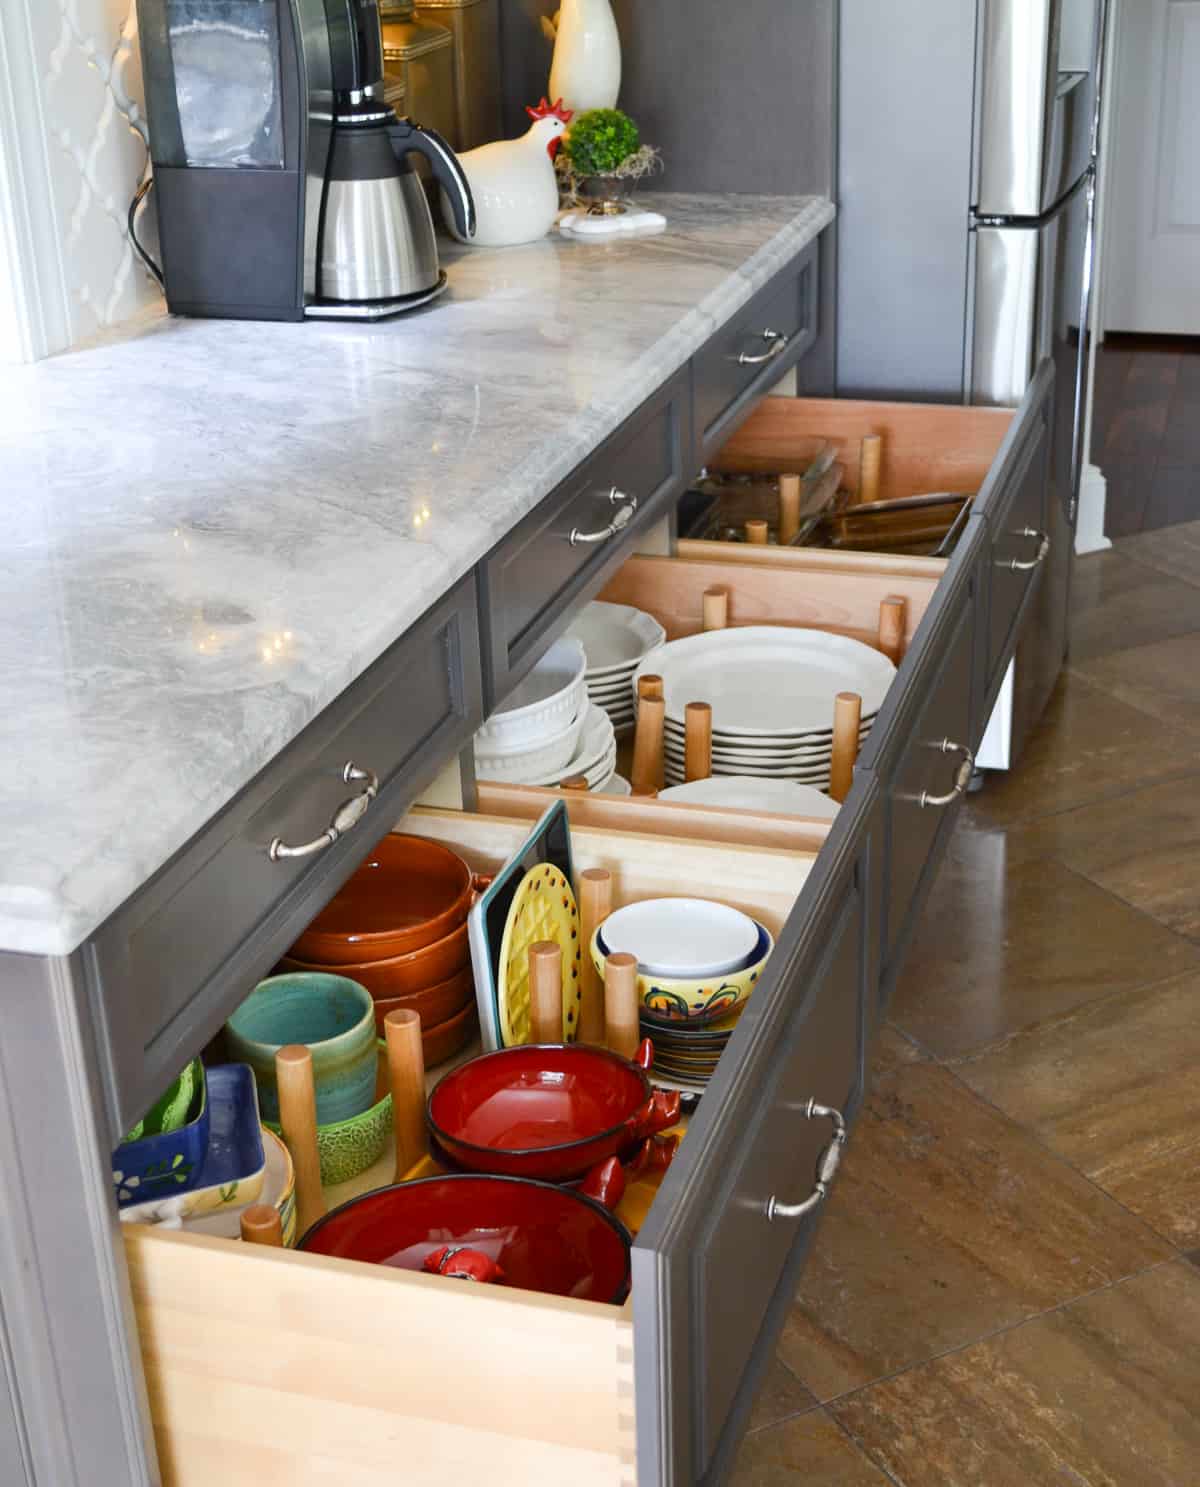 organized kitchen drawers filled with plates and platters